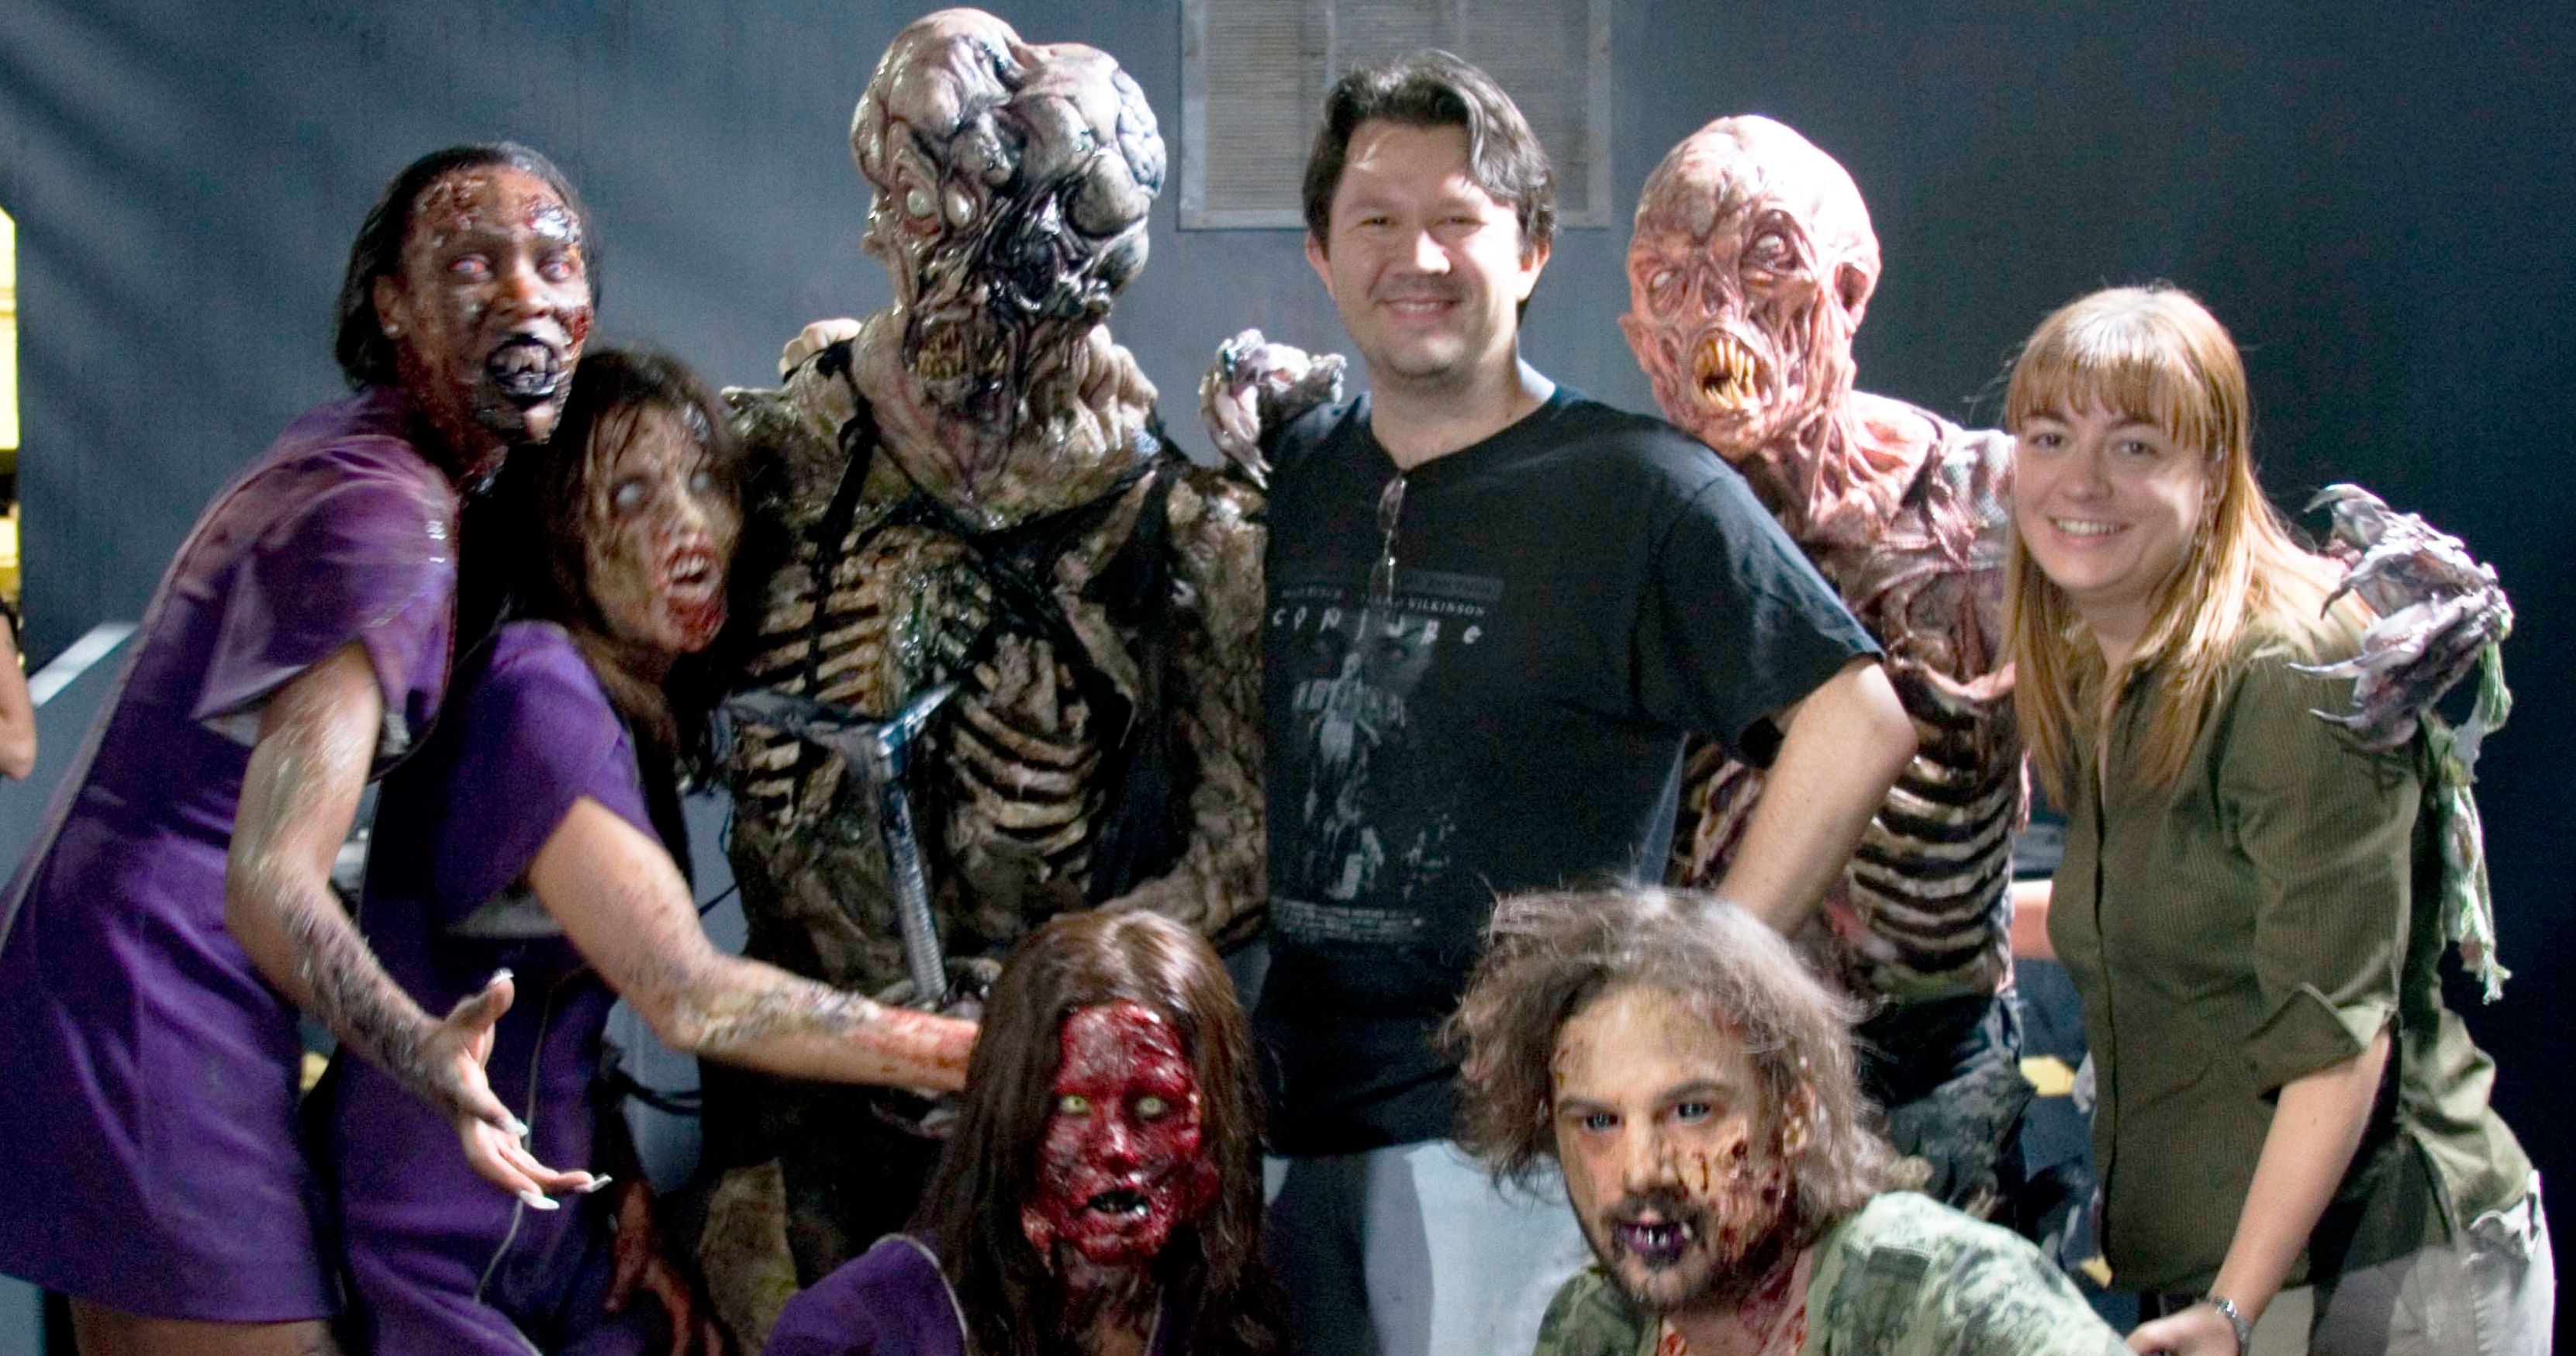 Brad Sykes Talks About His Practical FX Cult Classic Plaguers 10th Anniversary